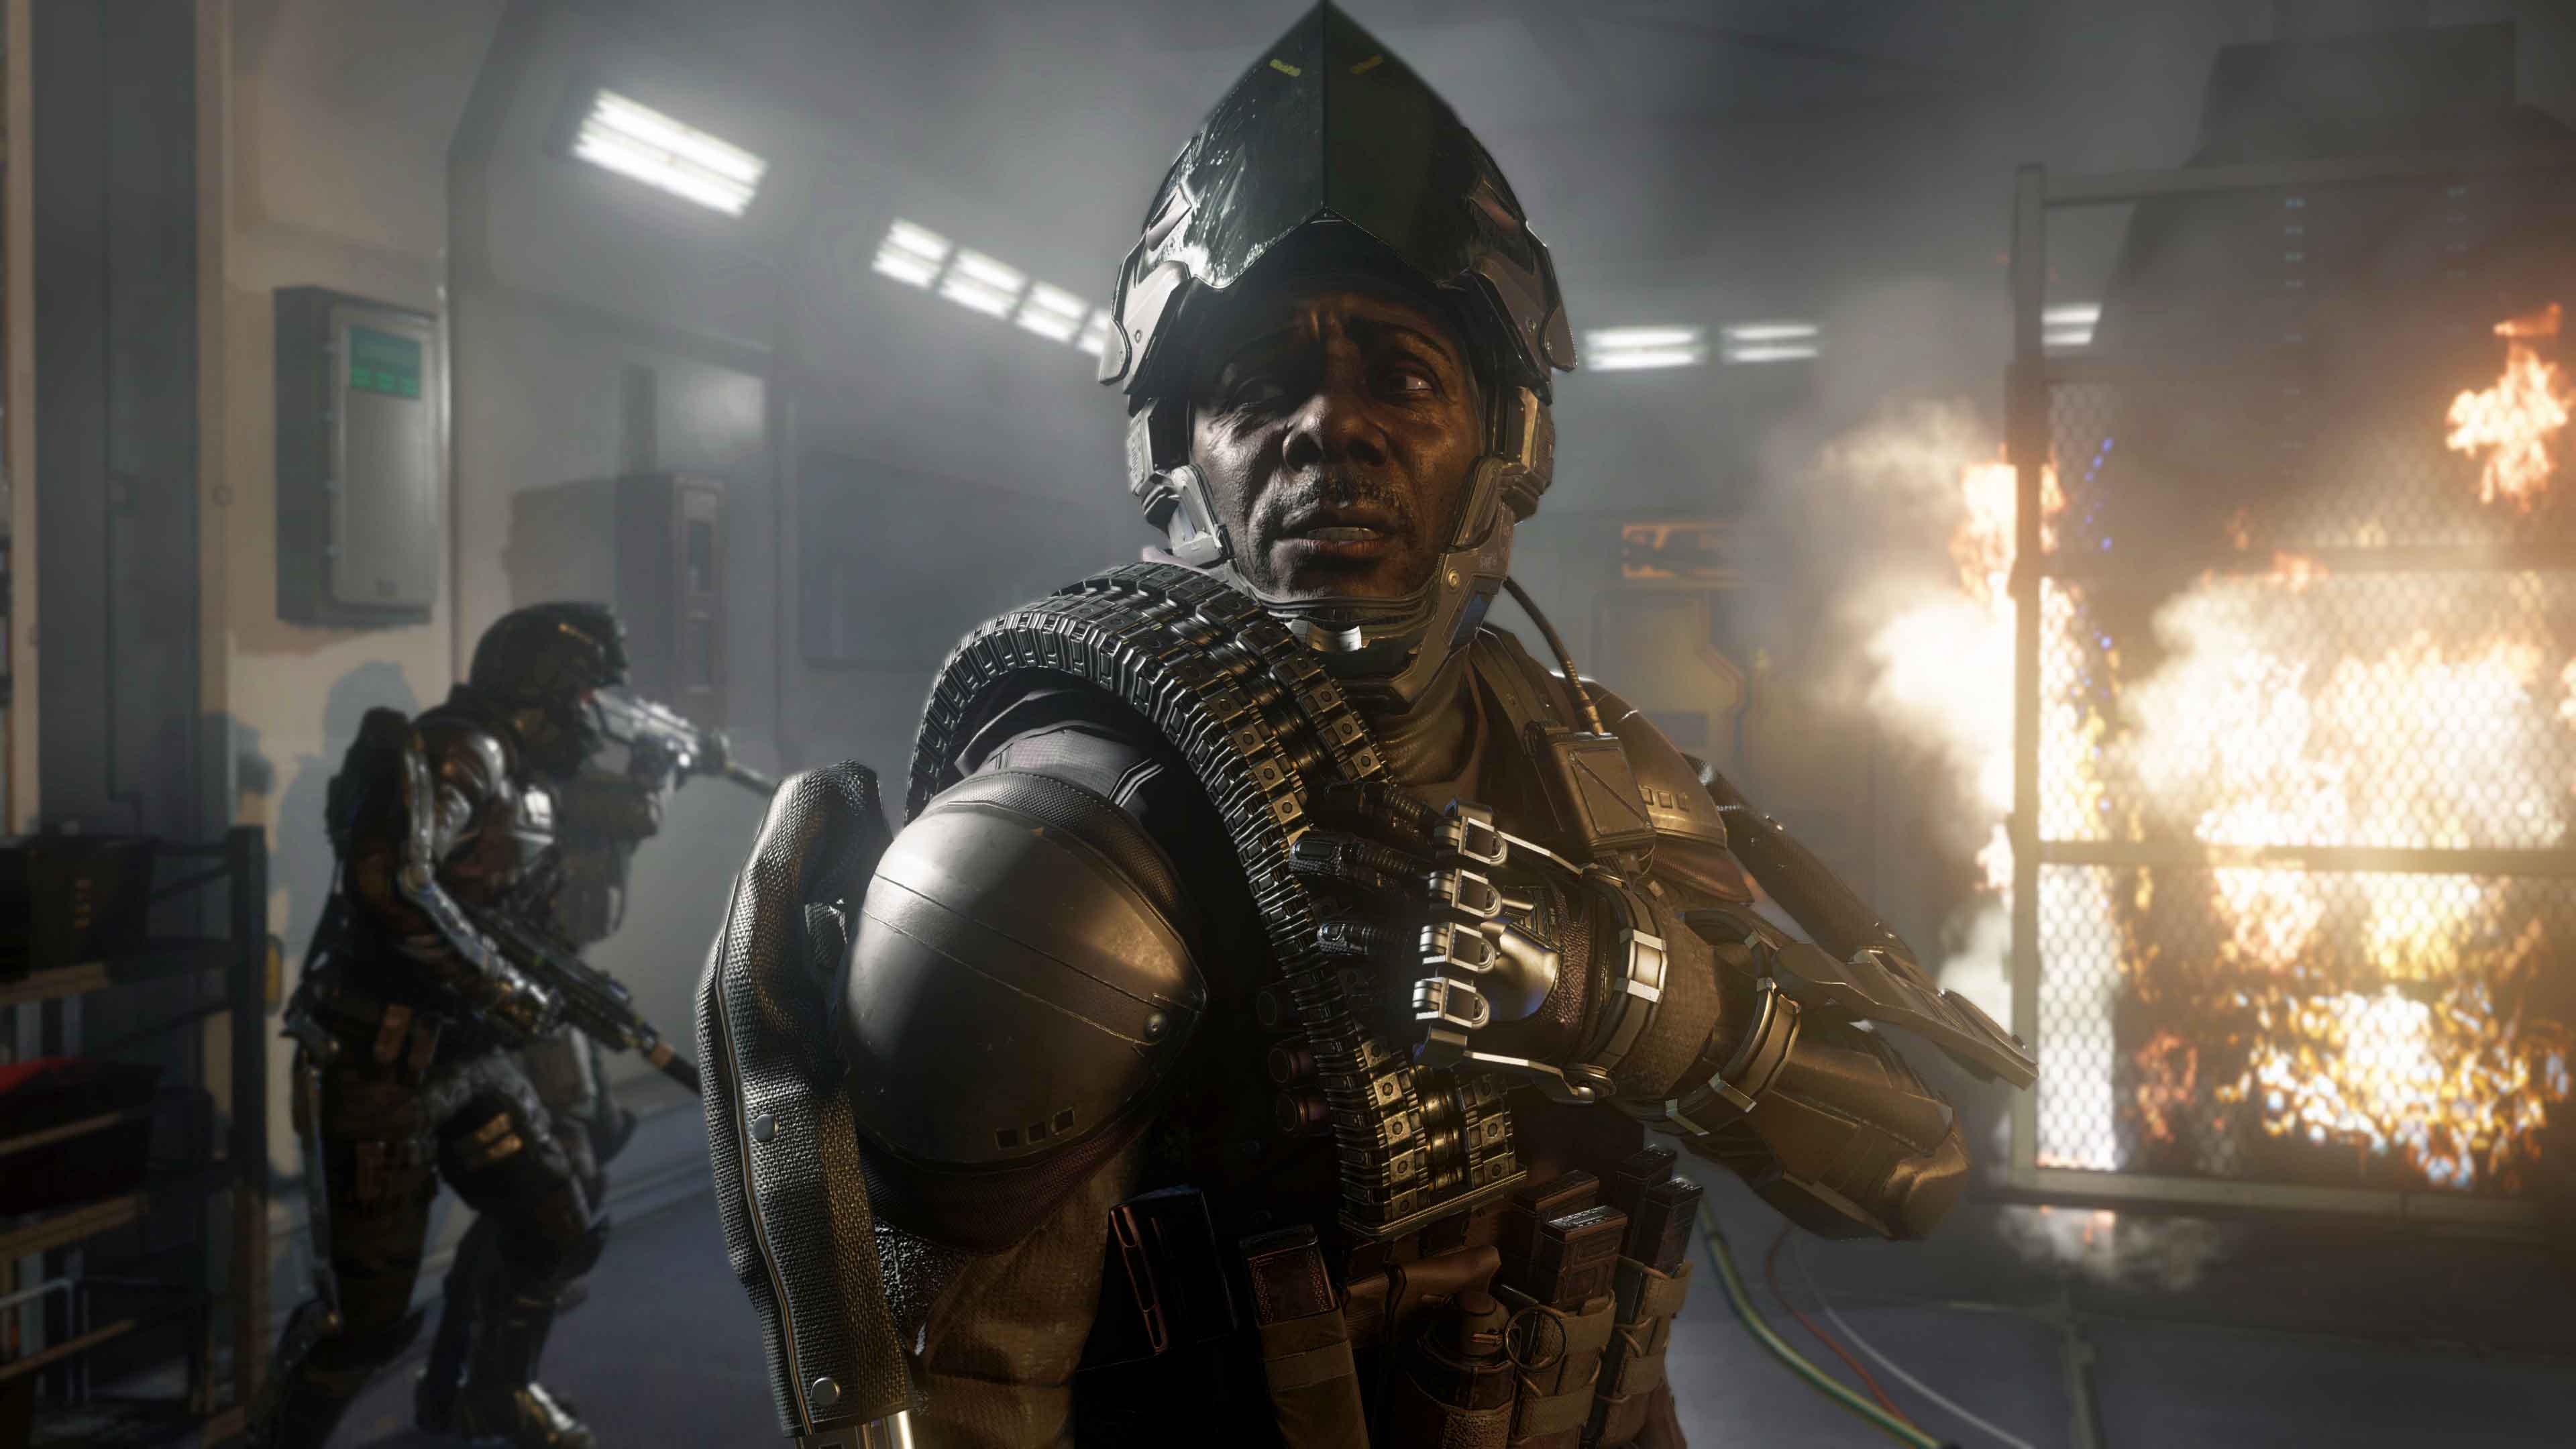 call of duty wallpaper hd,action adventure game,pc game,screenshot,armour,fictional character